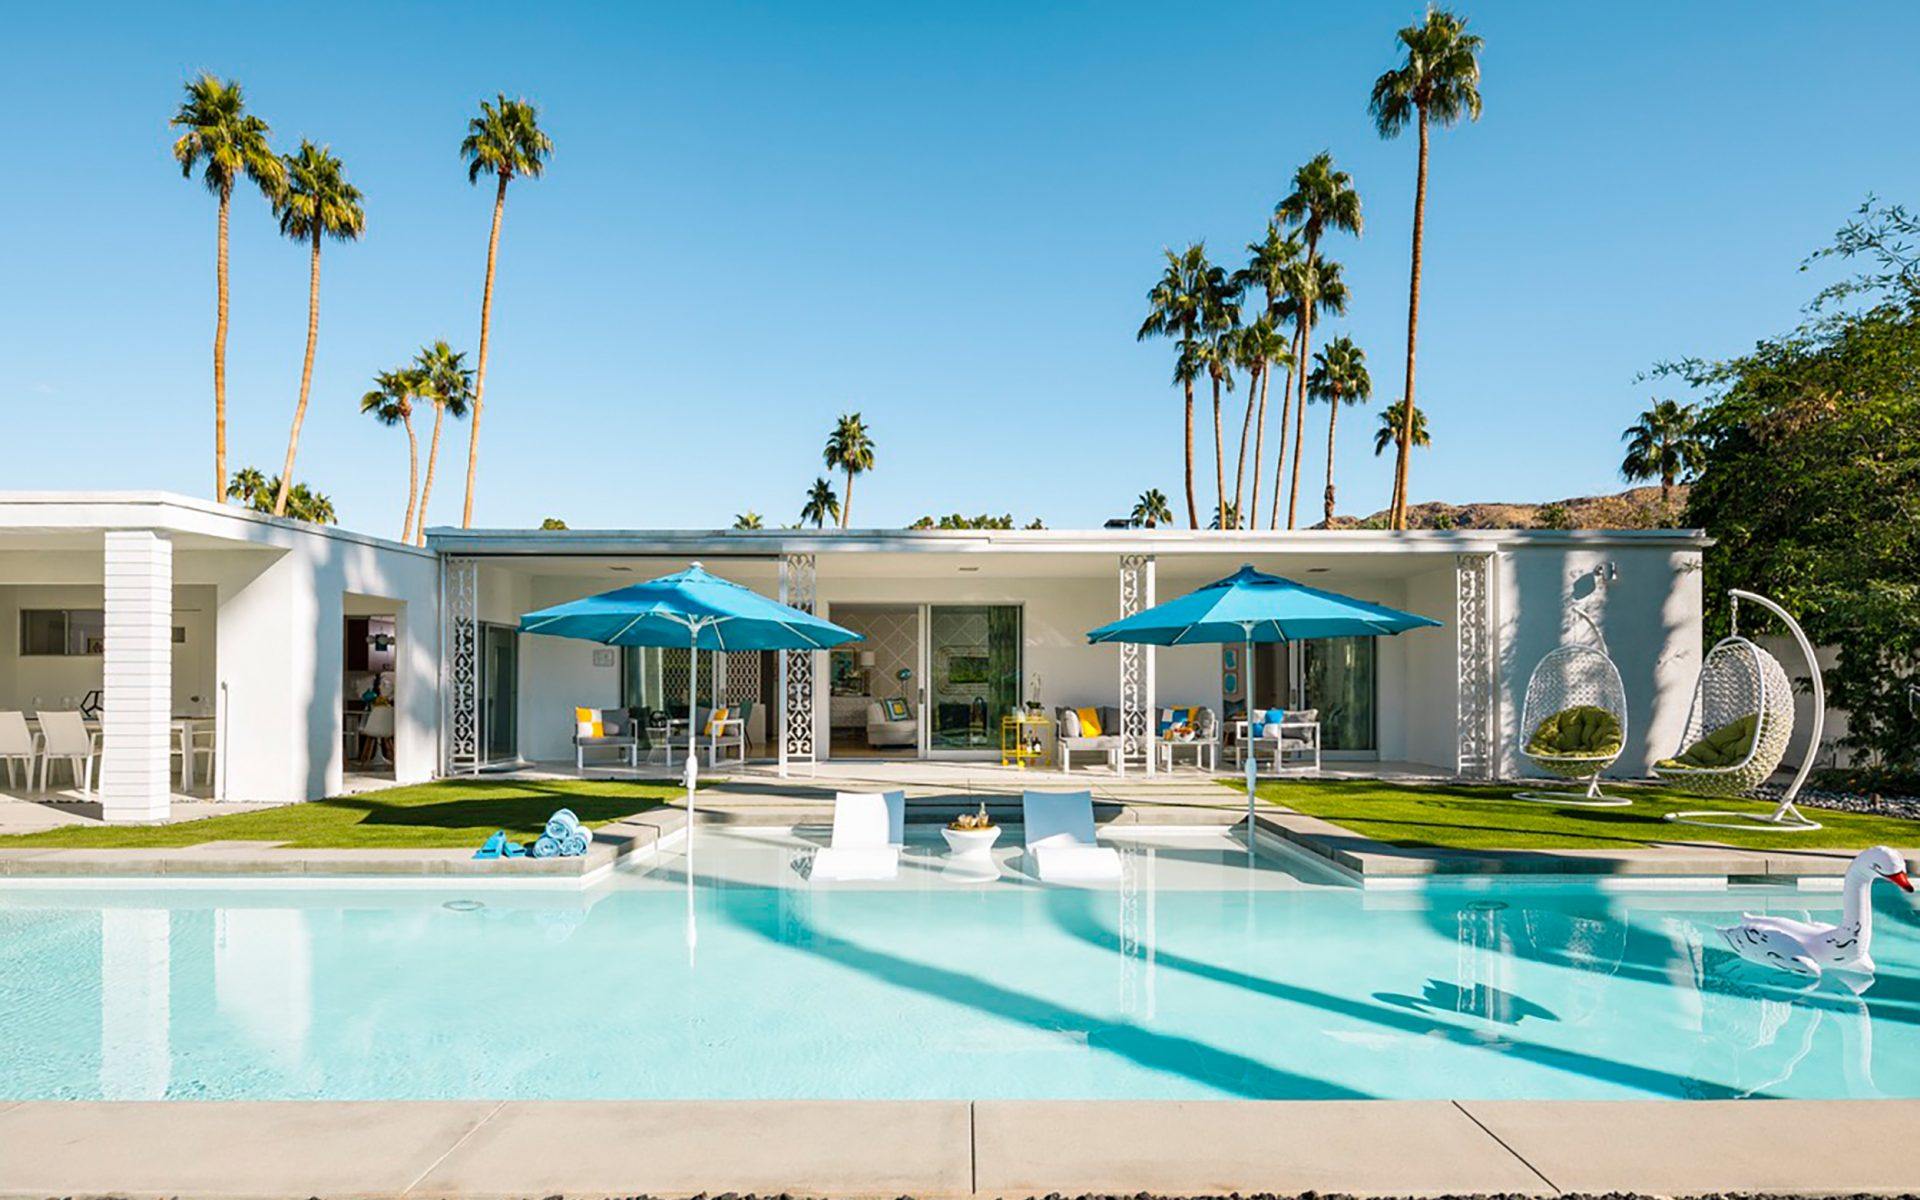 10 Iconic Homes to Visit During Modernism Week in Palm Springs Galerie